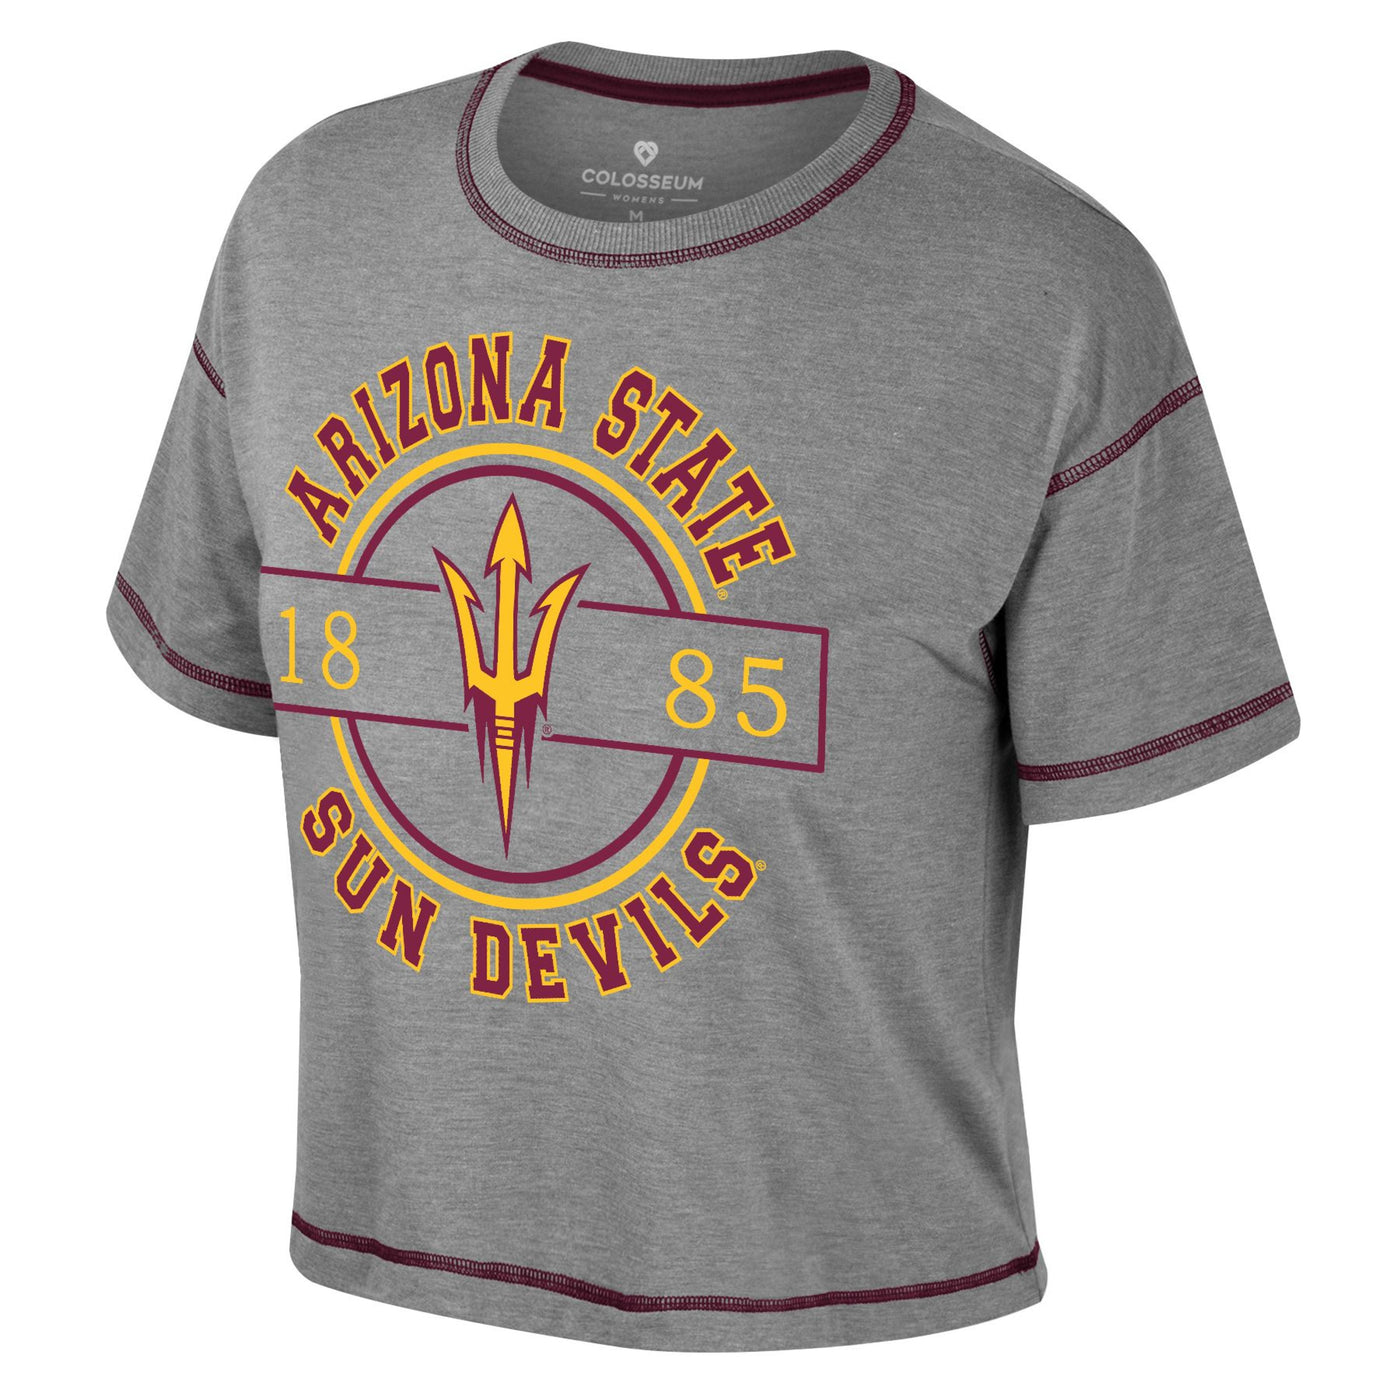 ASU grey crop top with maroon stitching along the trim. there is the text 